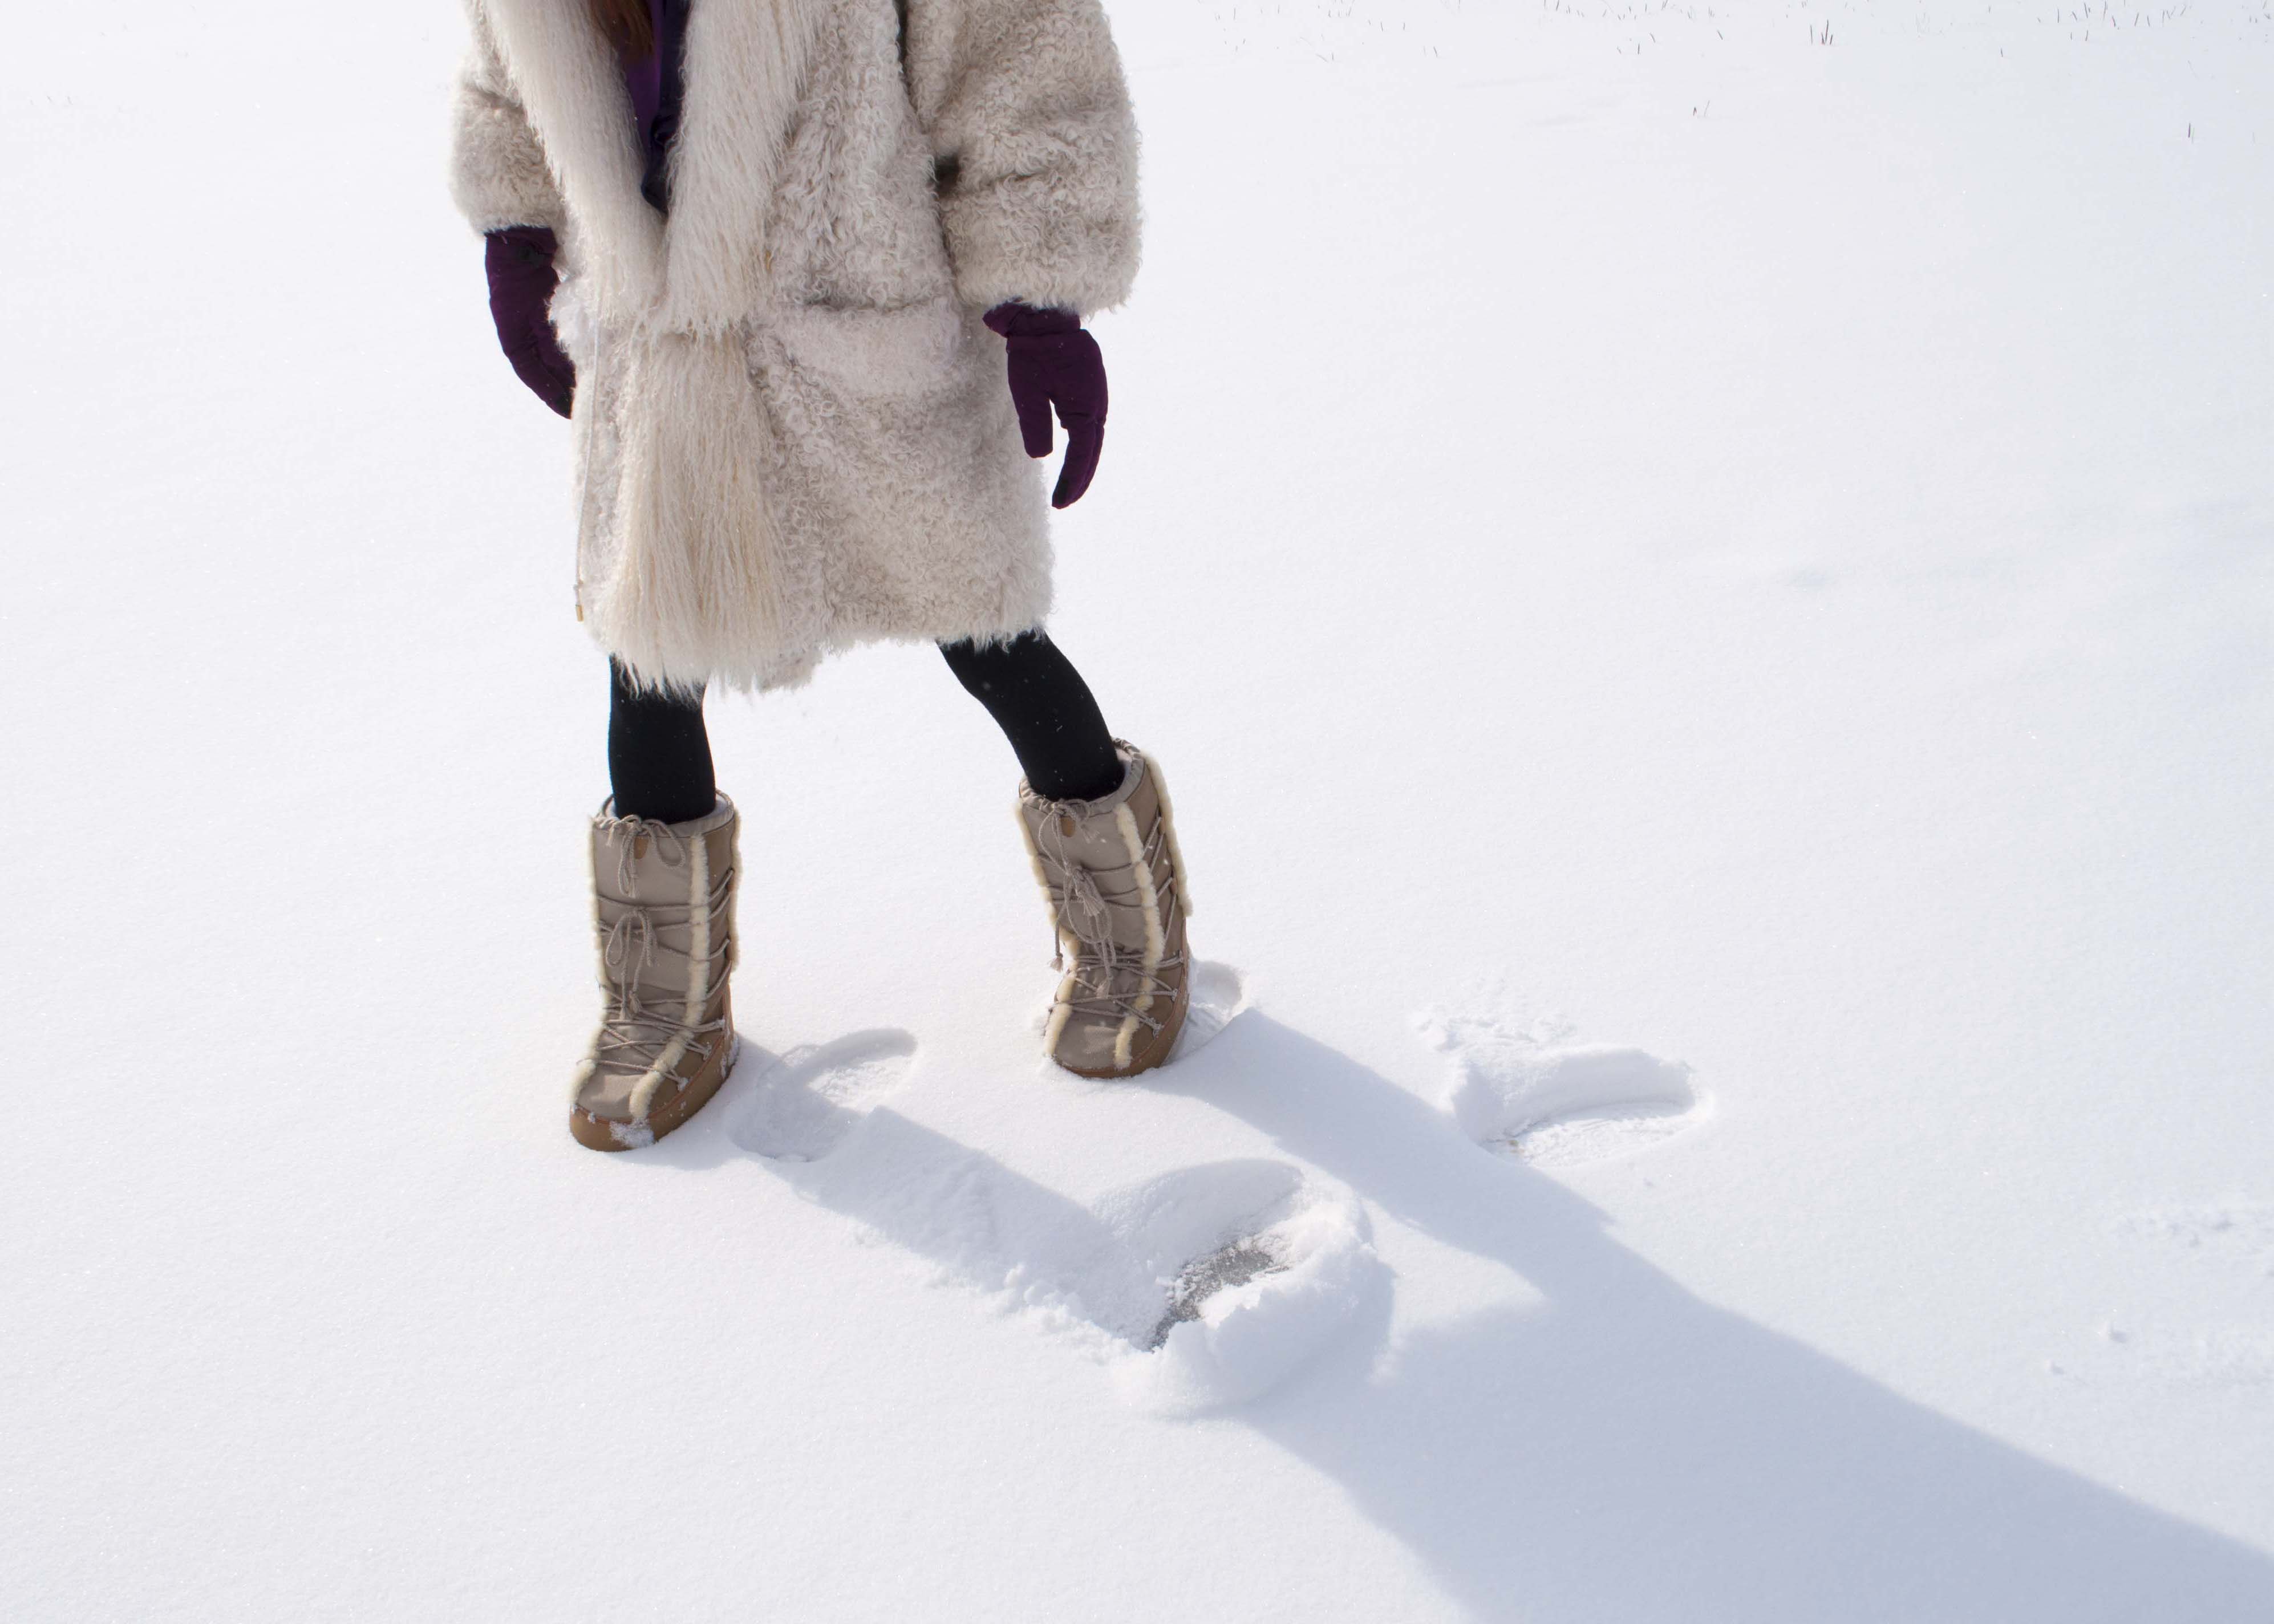 fur coat and moon boots on fresh snow